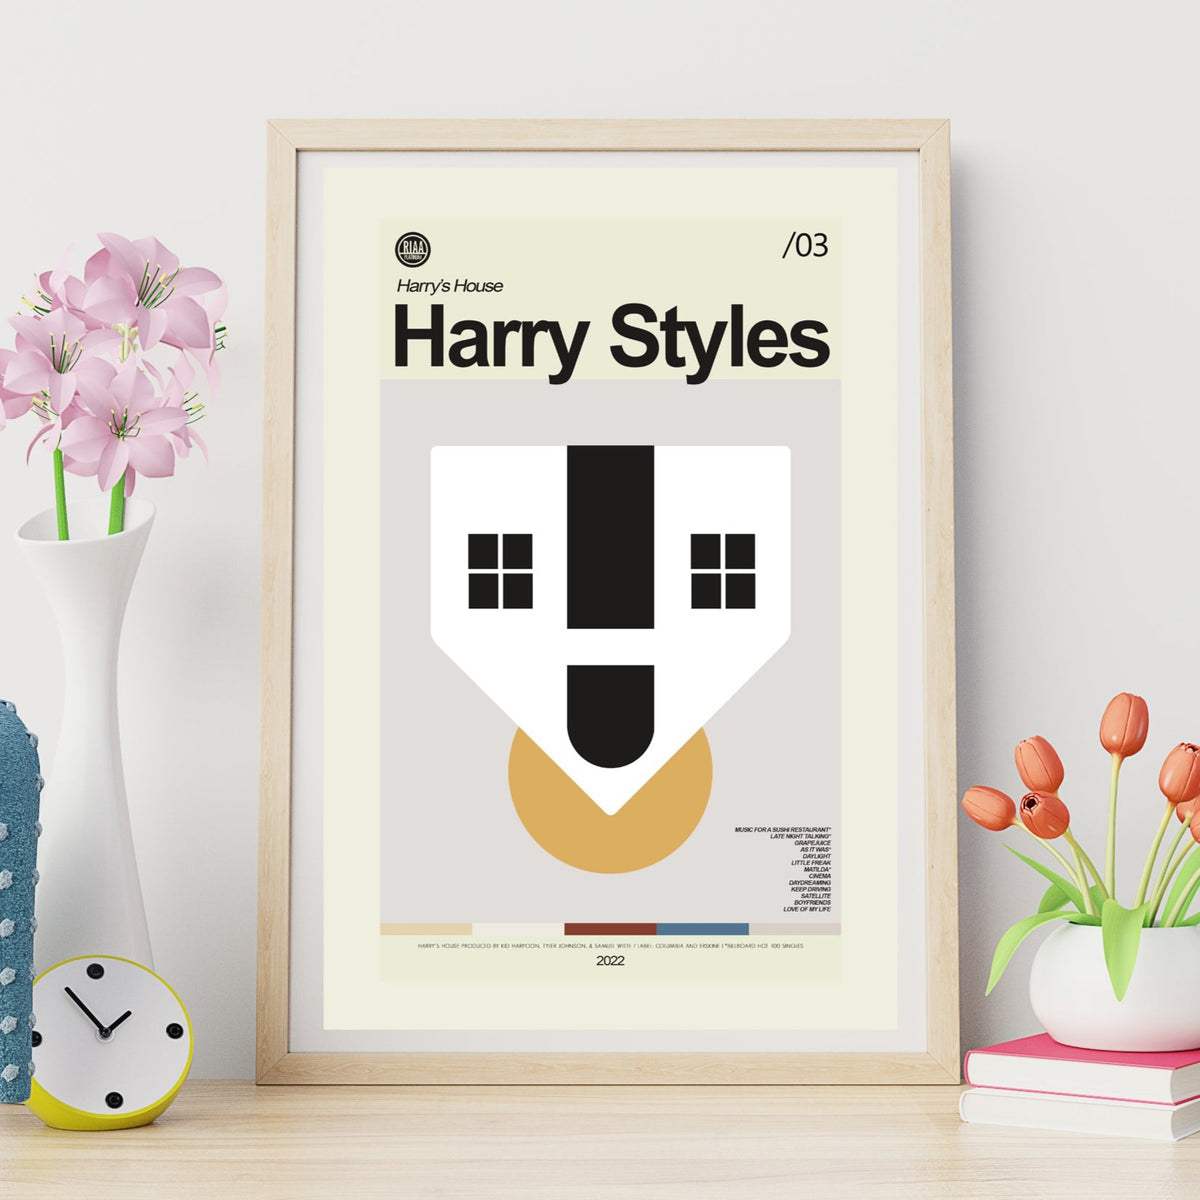 Harry Styles - Harry's House (Album) Inspired | 12"x18" or 18"x24" Print only